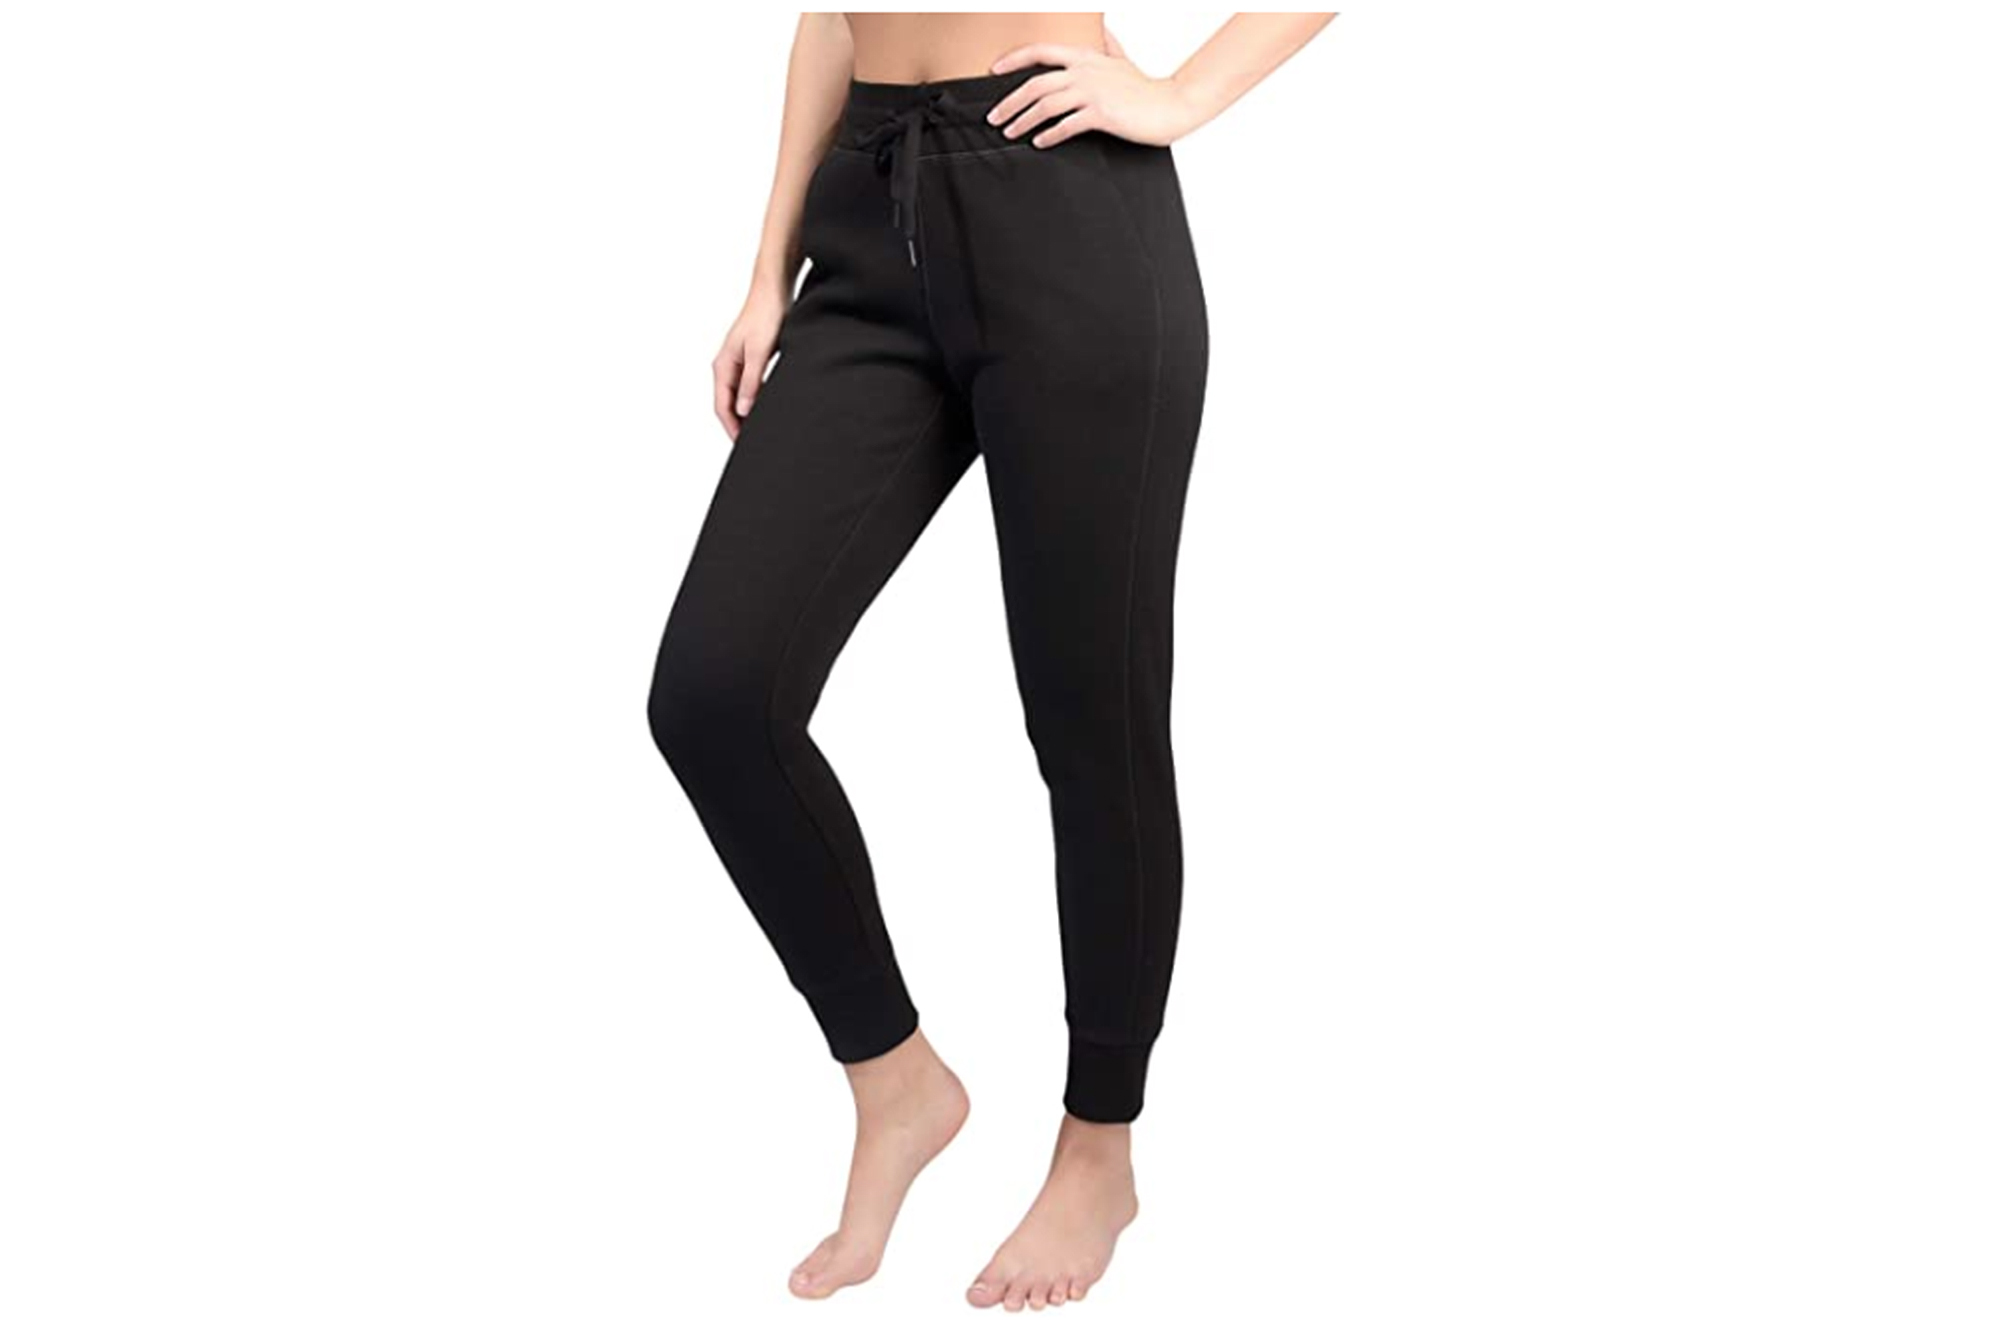 Stay Comfortable and Stylish with Yoga Reflex Women's Capris